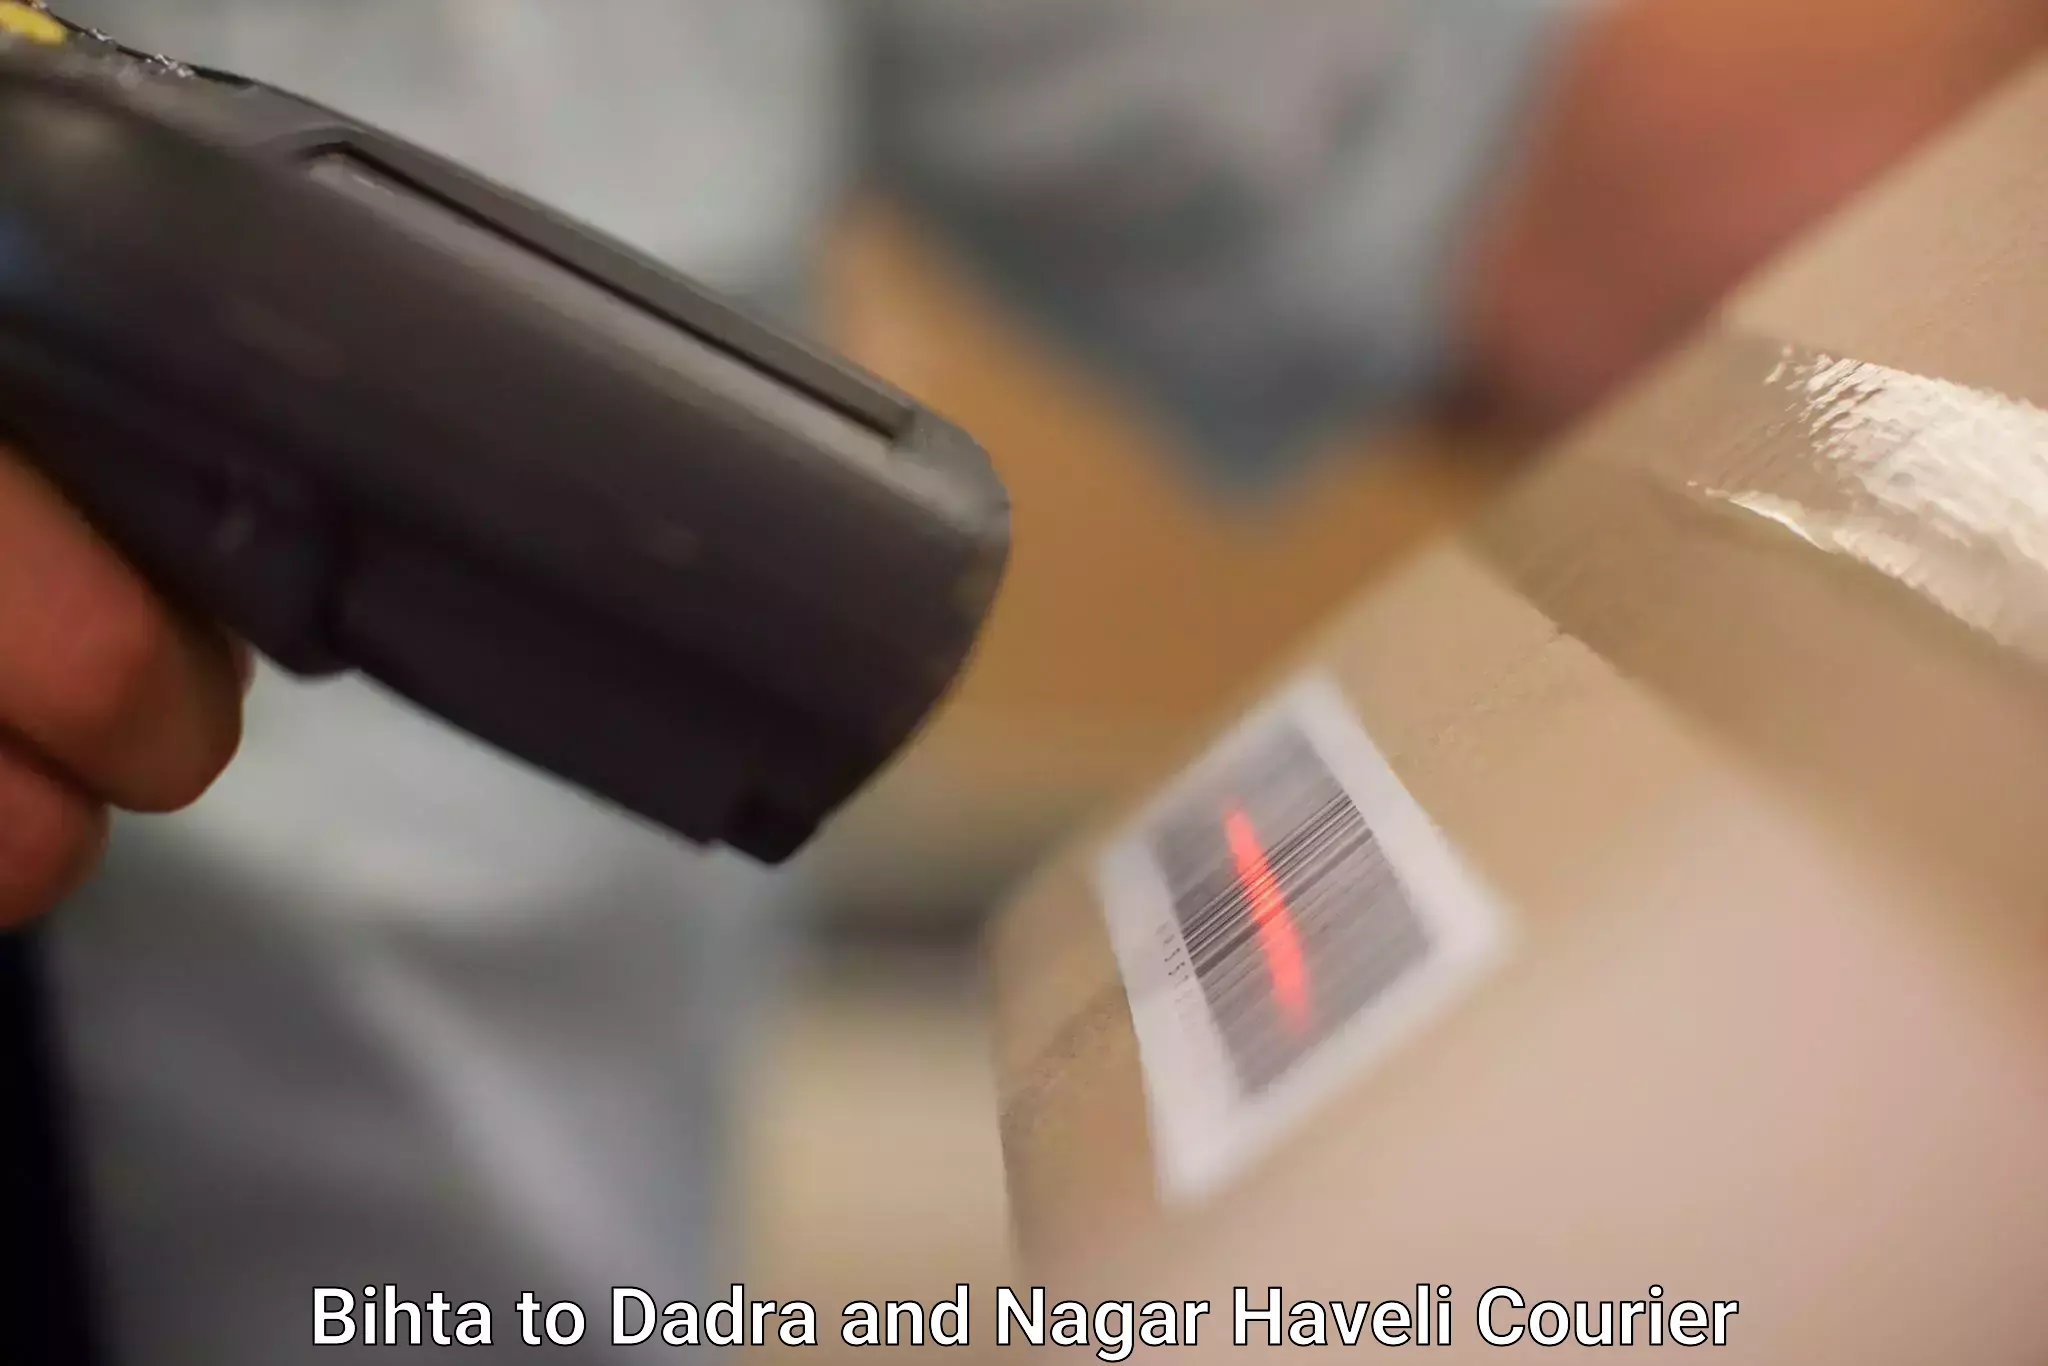 Medical delivery services Bihta to Dadra and Nagar Haveli